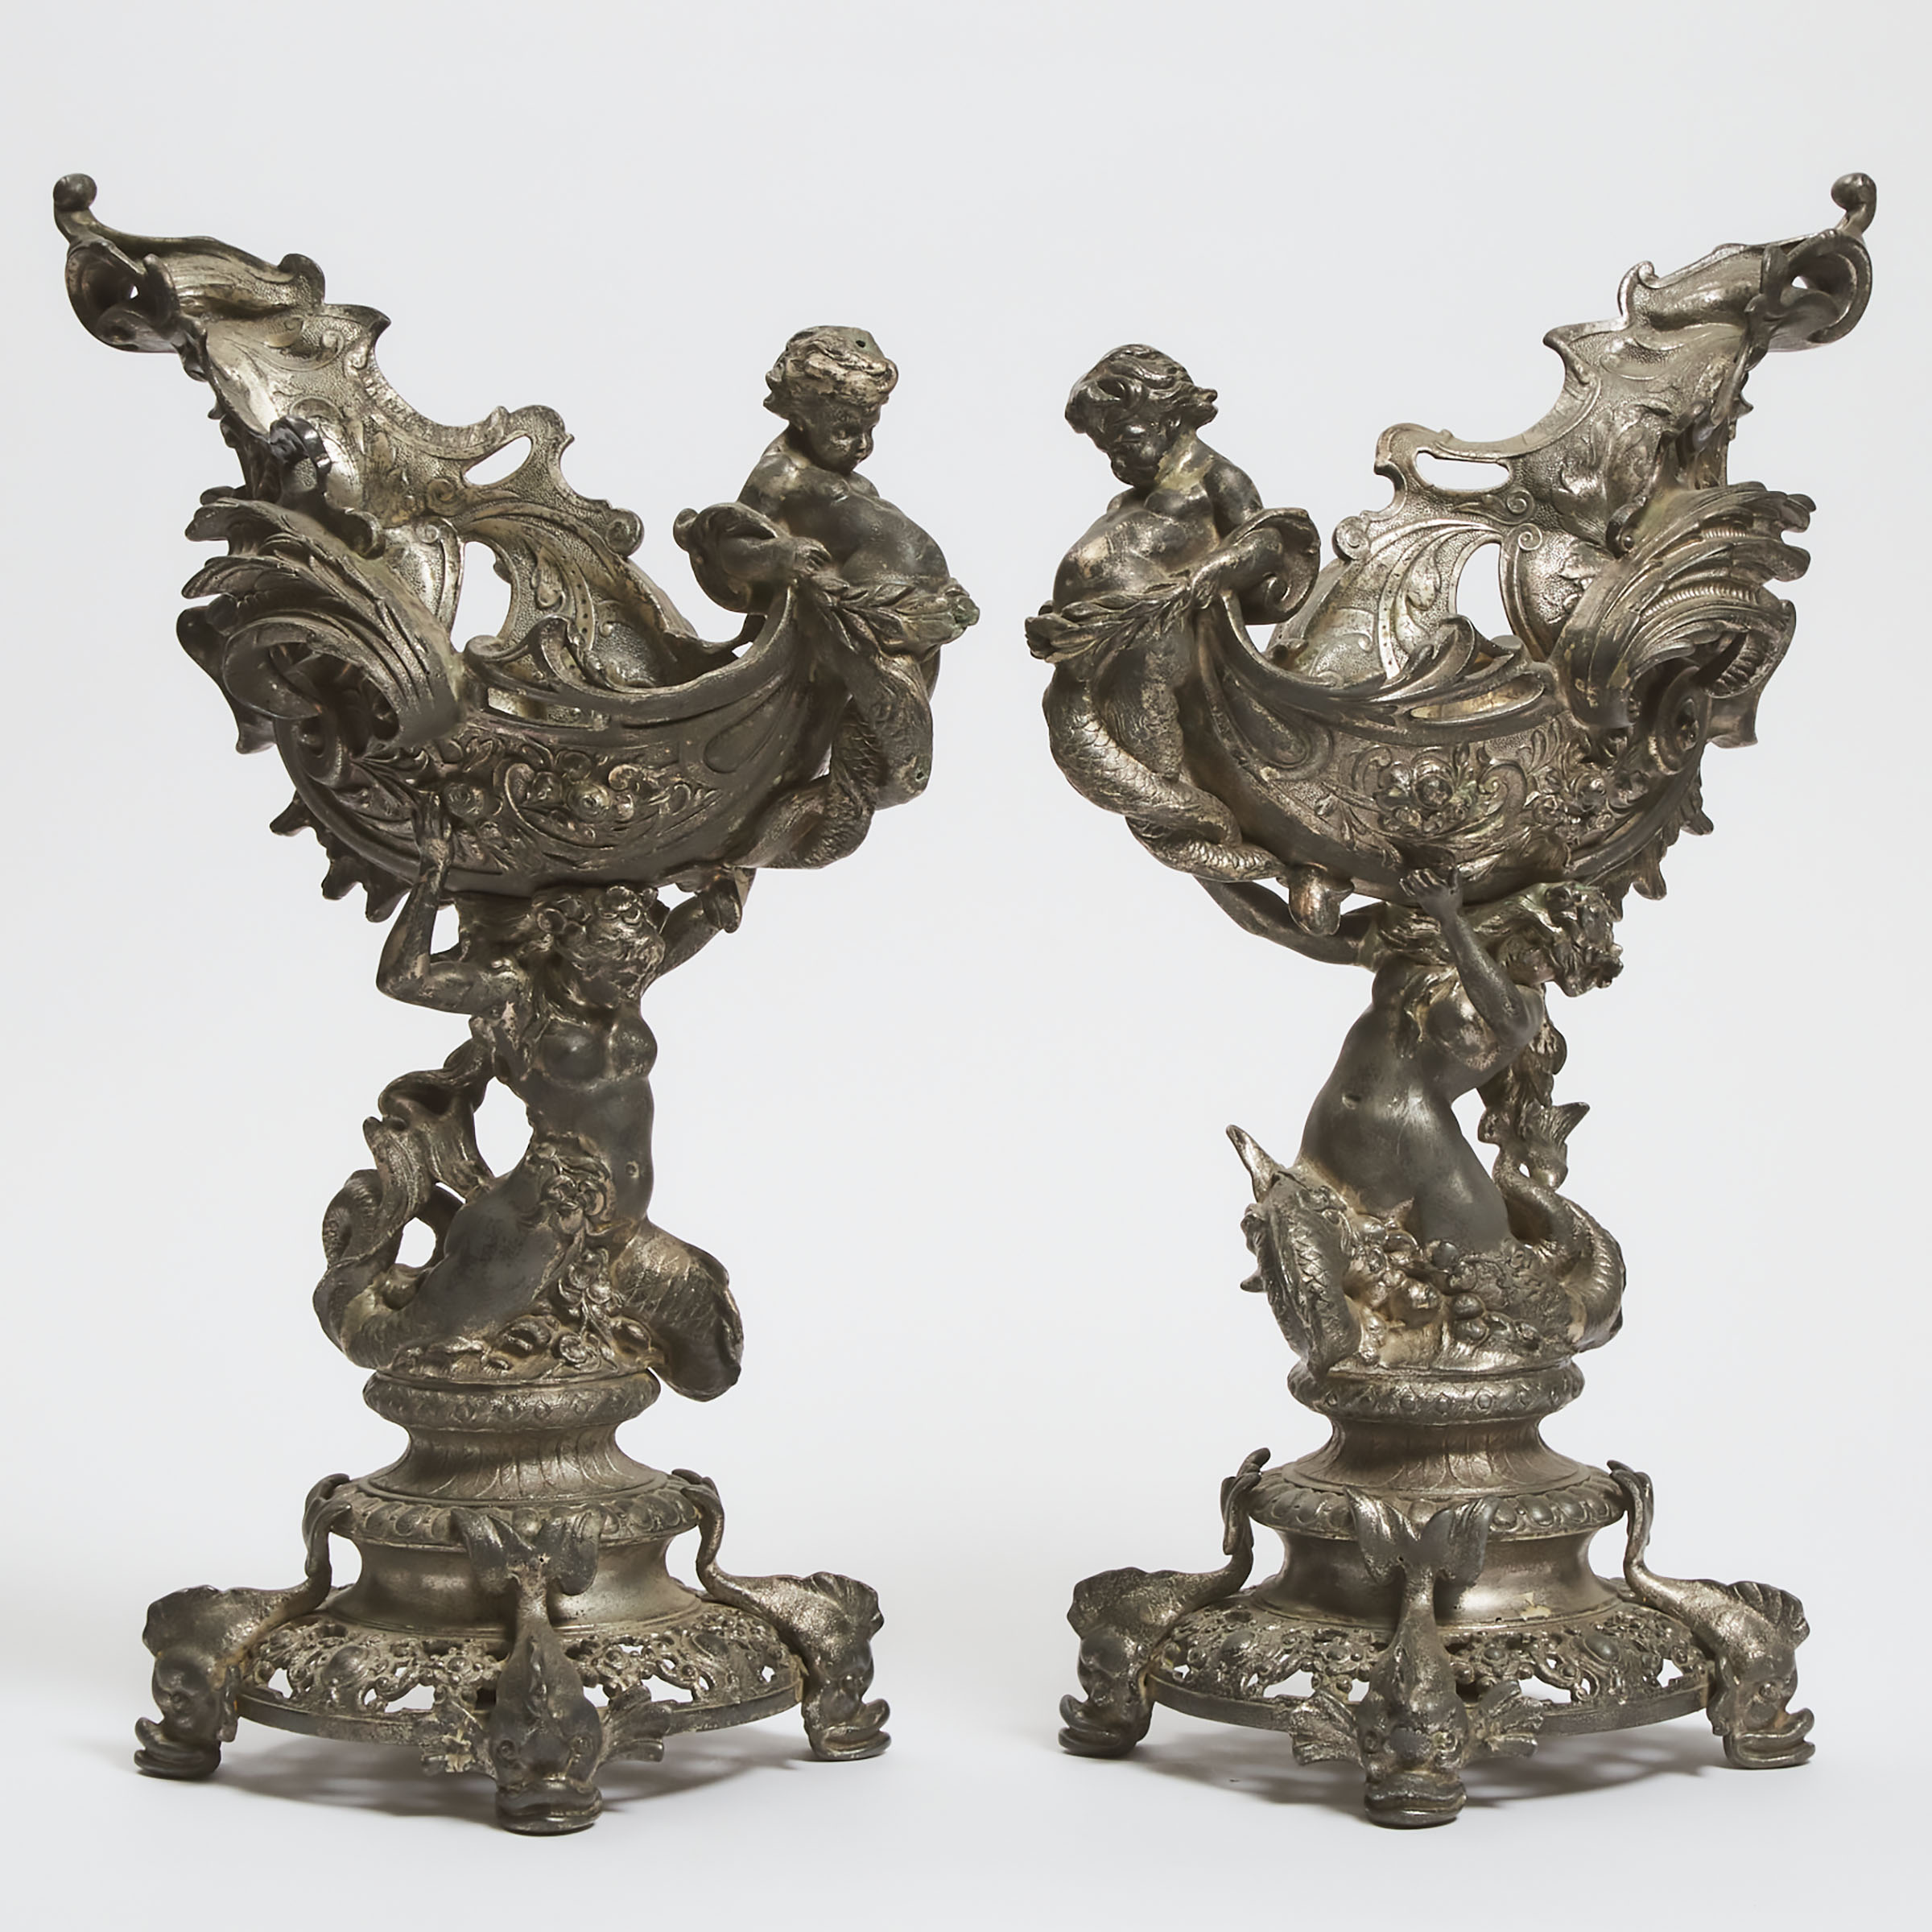 Large Pair of Continental Silvered Metal Figural 'Nautalus Cup' Form Tazzas, 19th/early 20th century